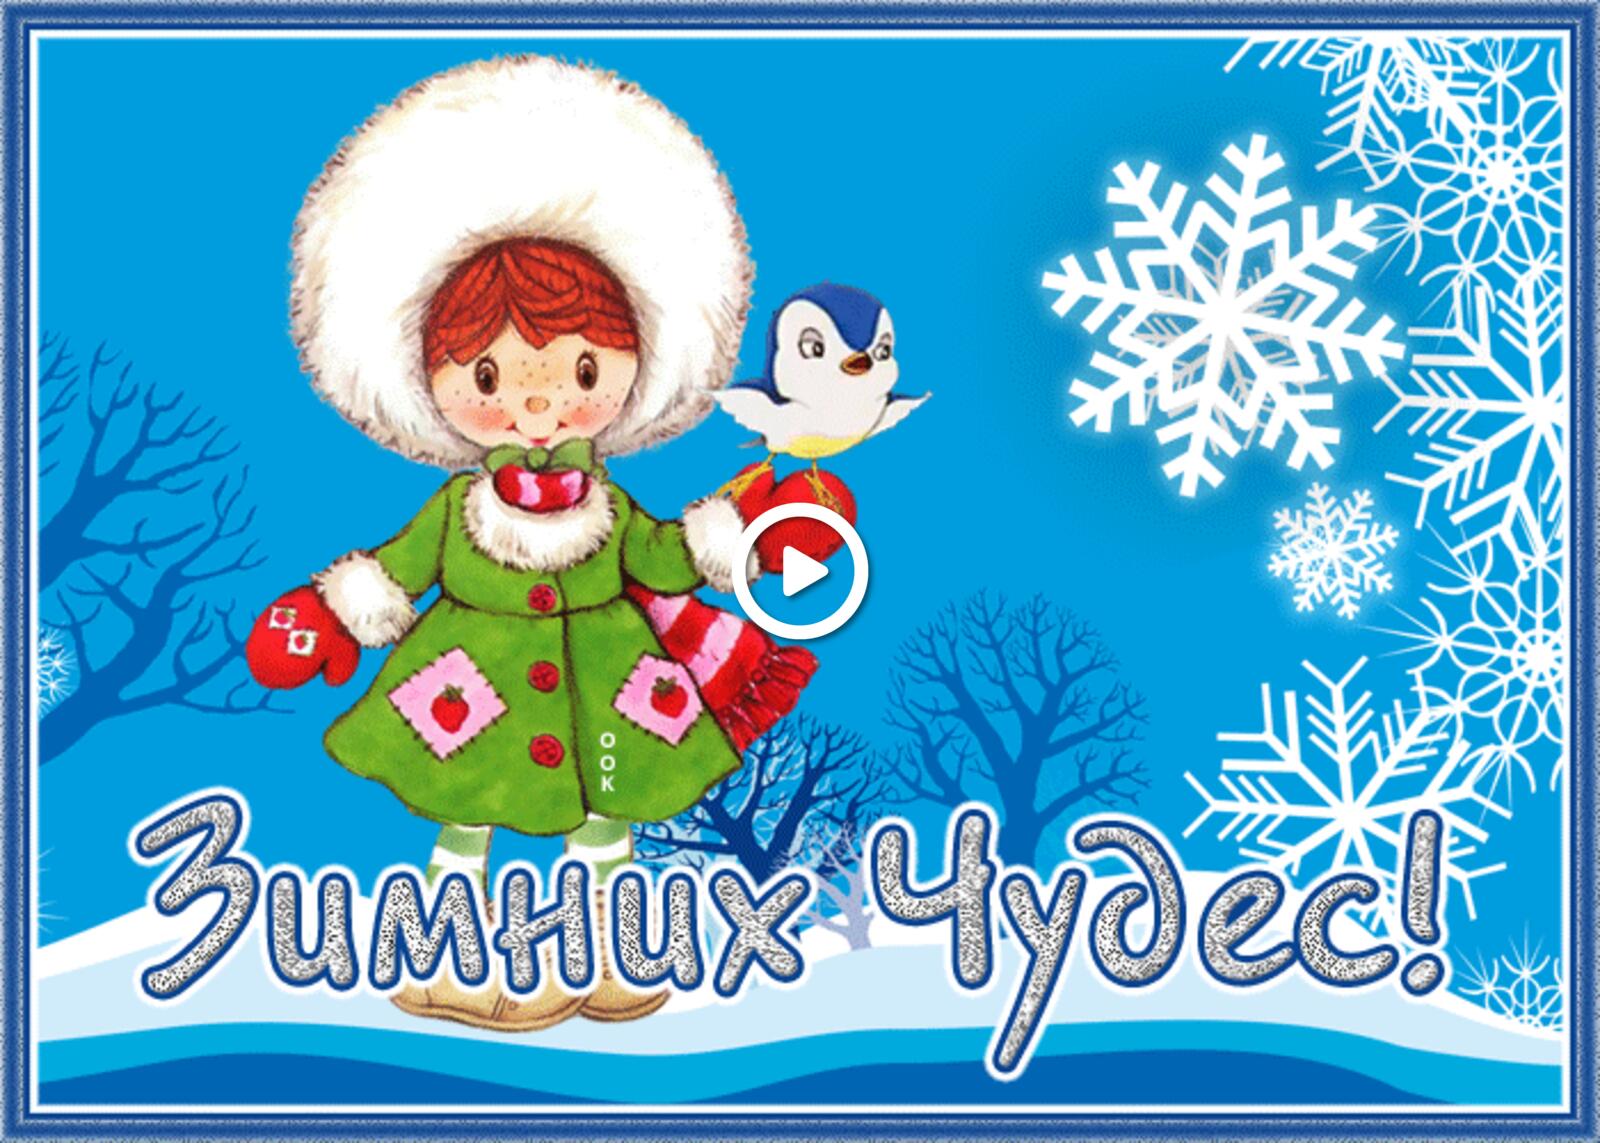 A postcard on the subject of a colorful winter wonderland snowflakes moods for free